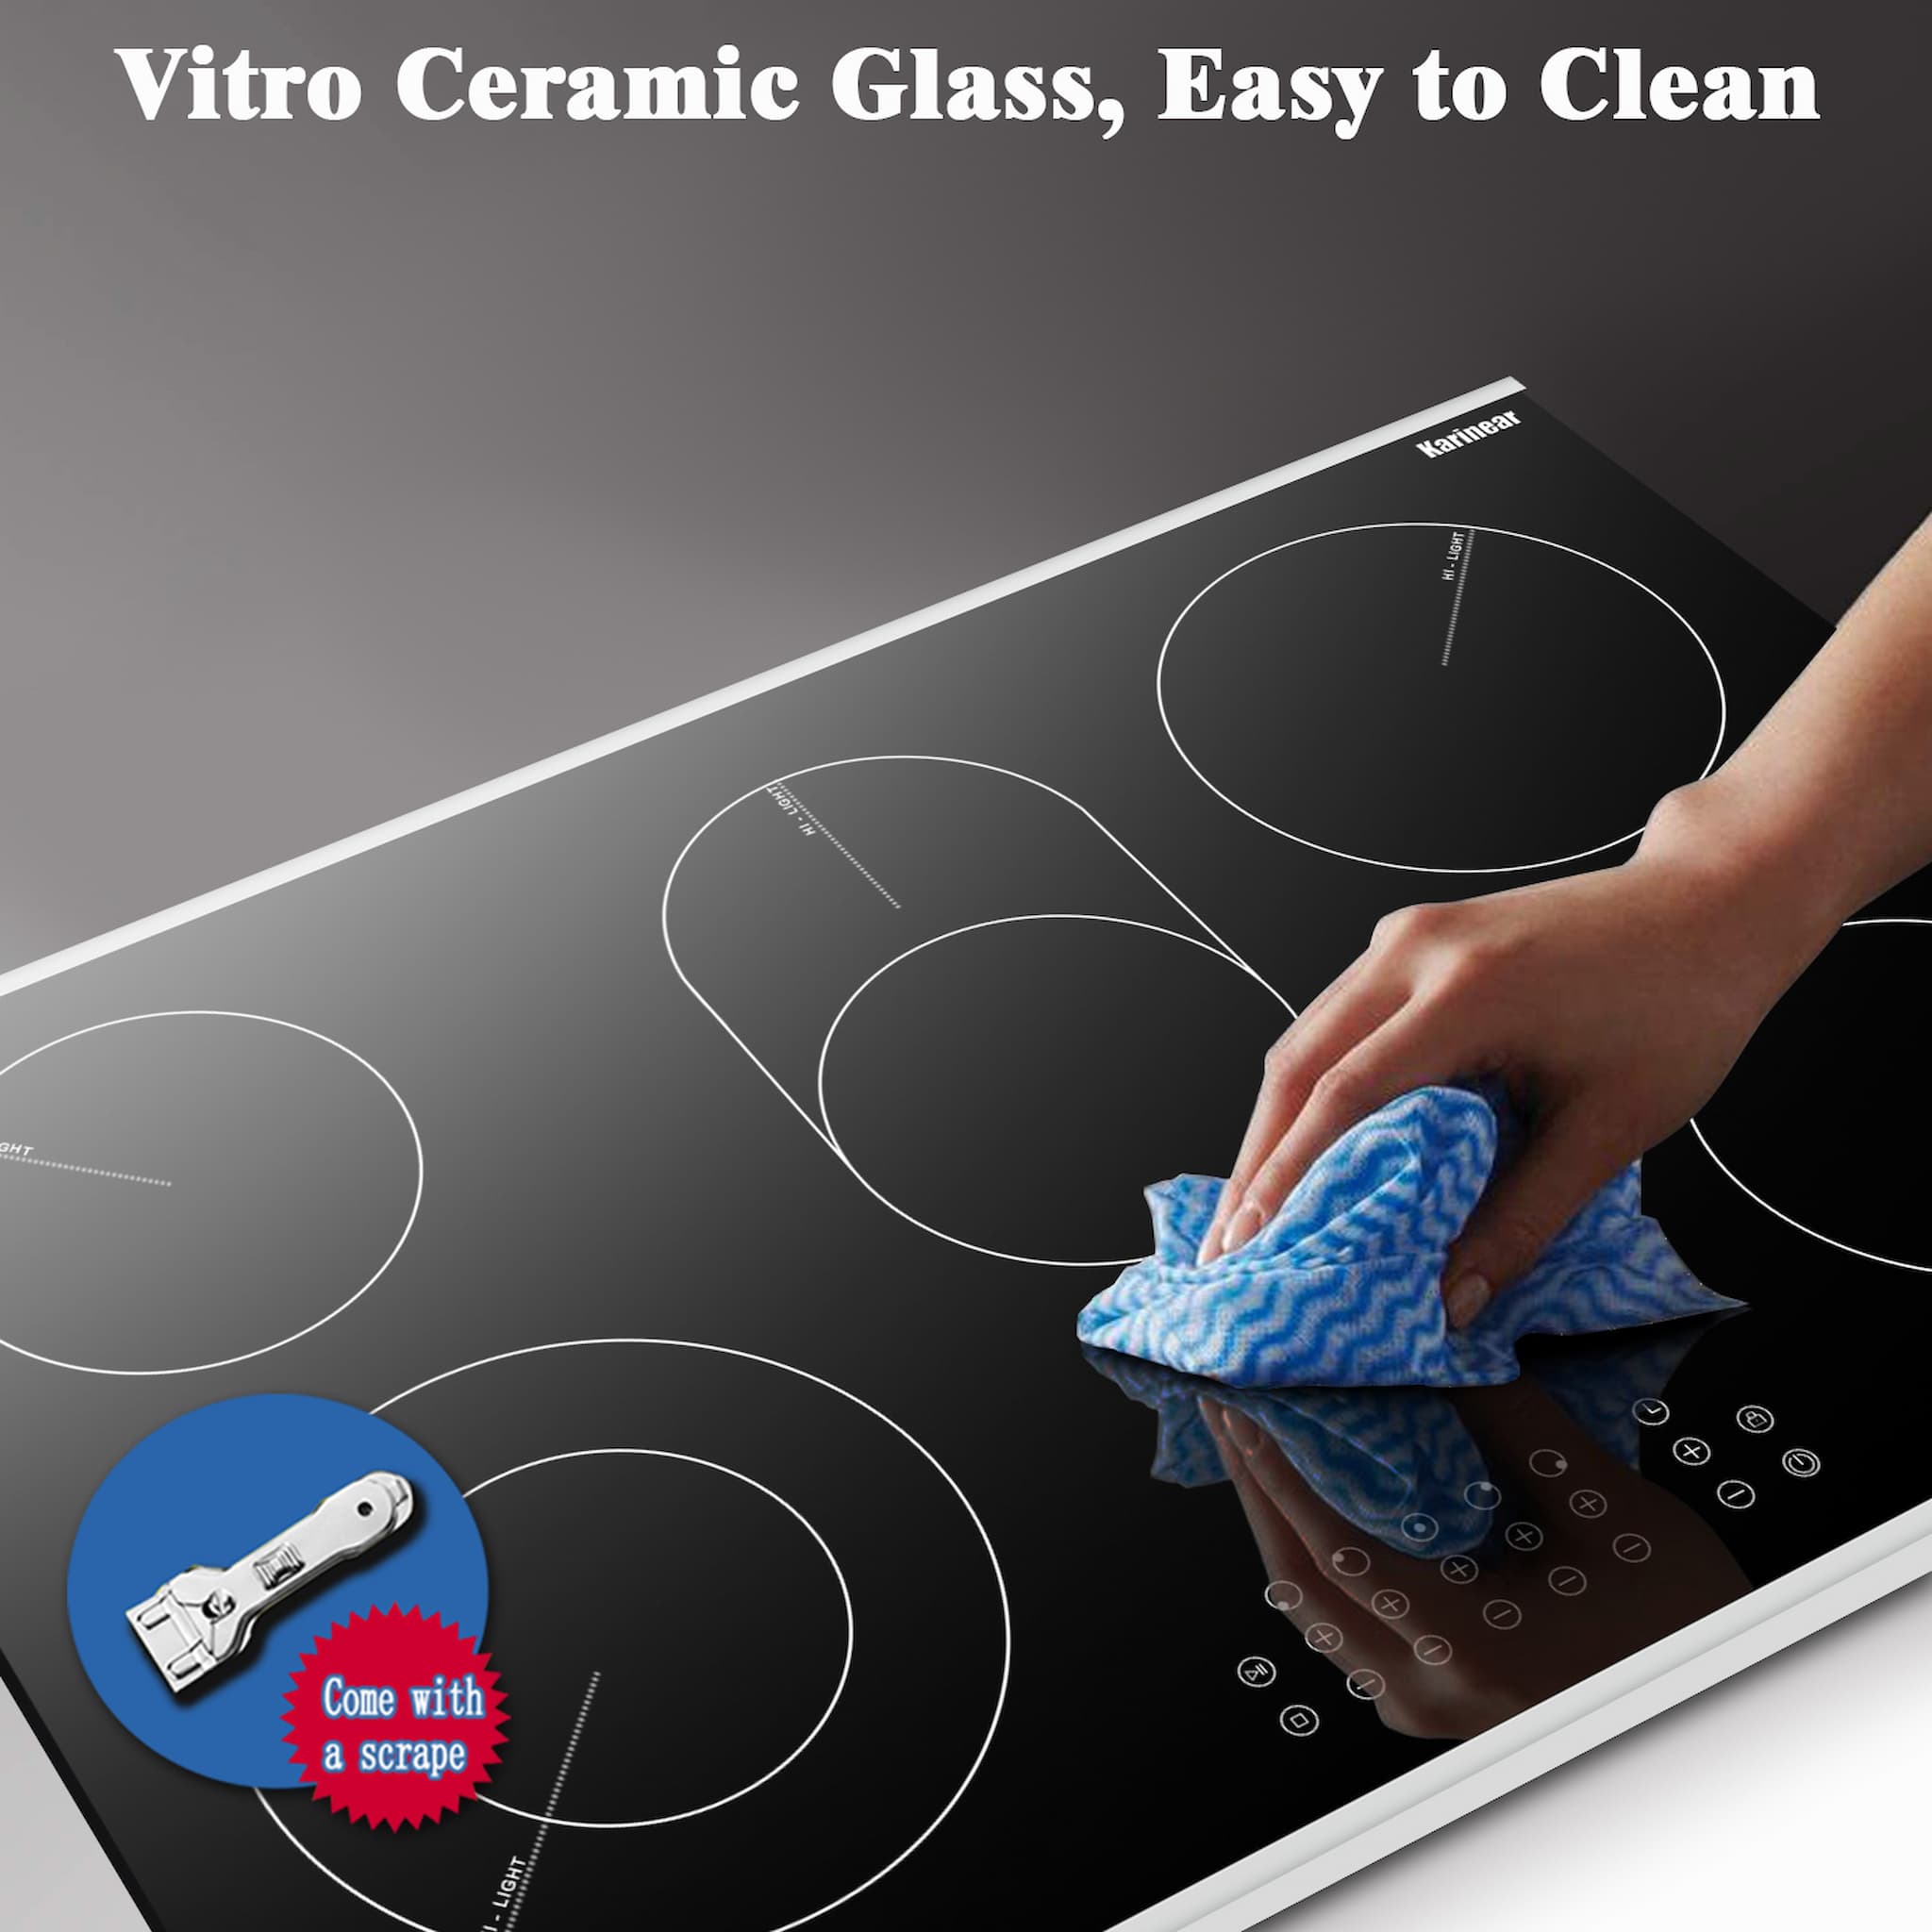 With high quality vitroceramic glass surface , the drop in electric cooktop 30 inch is not noly easy to clean, but also protected from scratches and withstands intense heat without cracking or chipping.